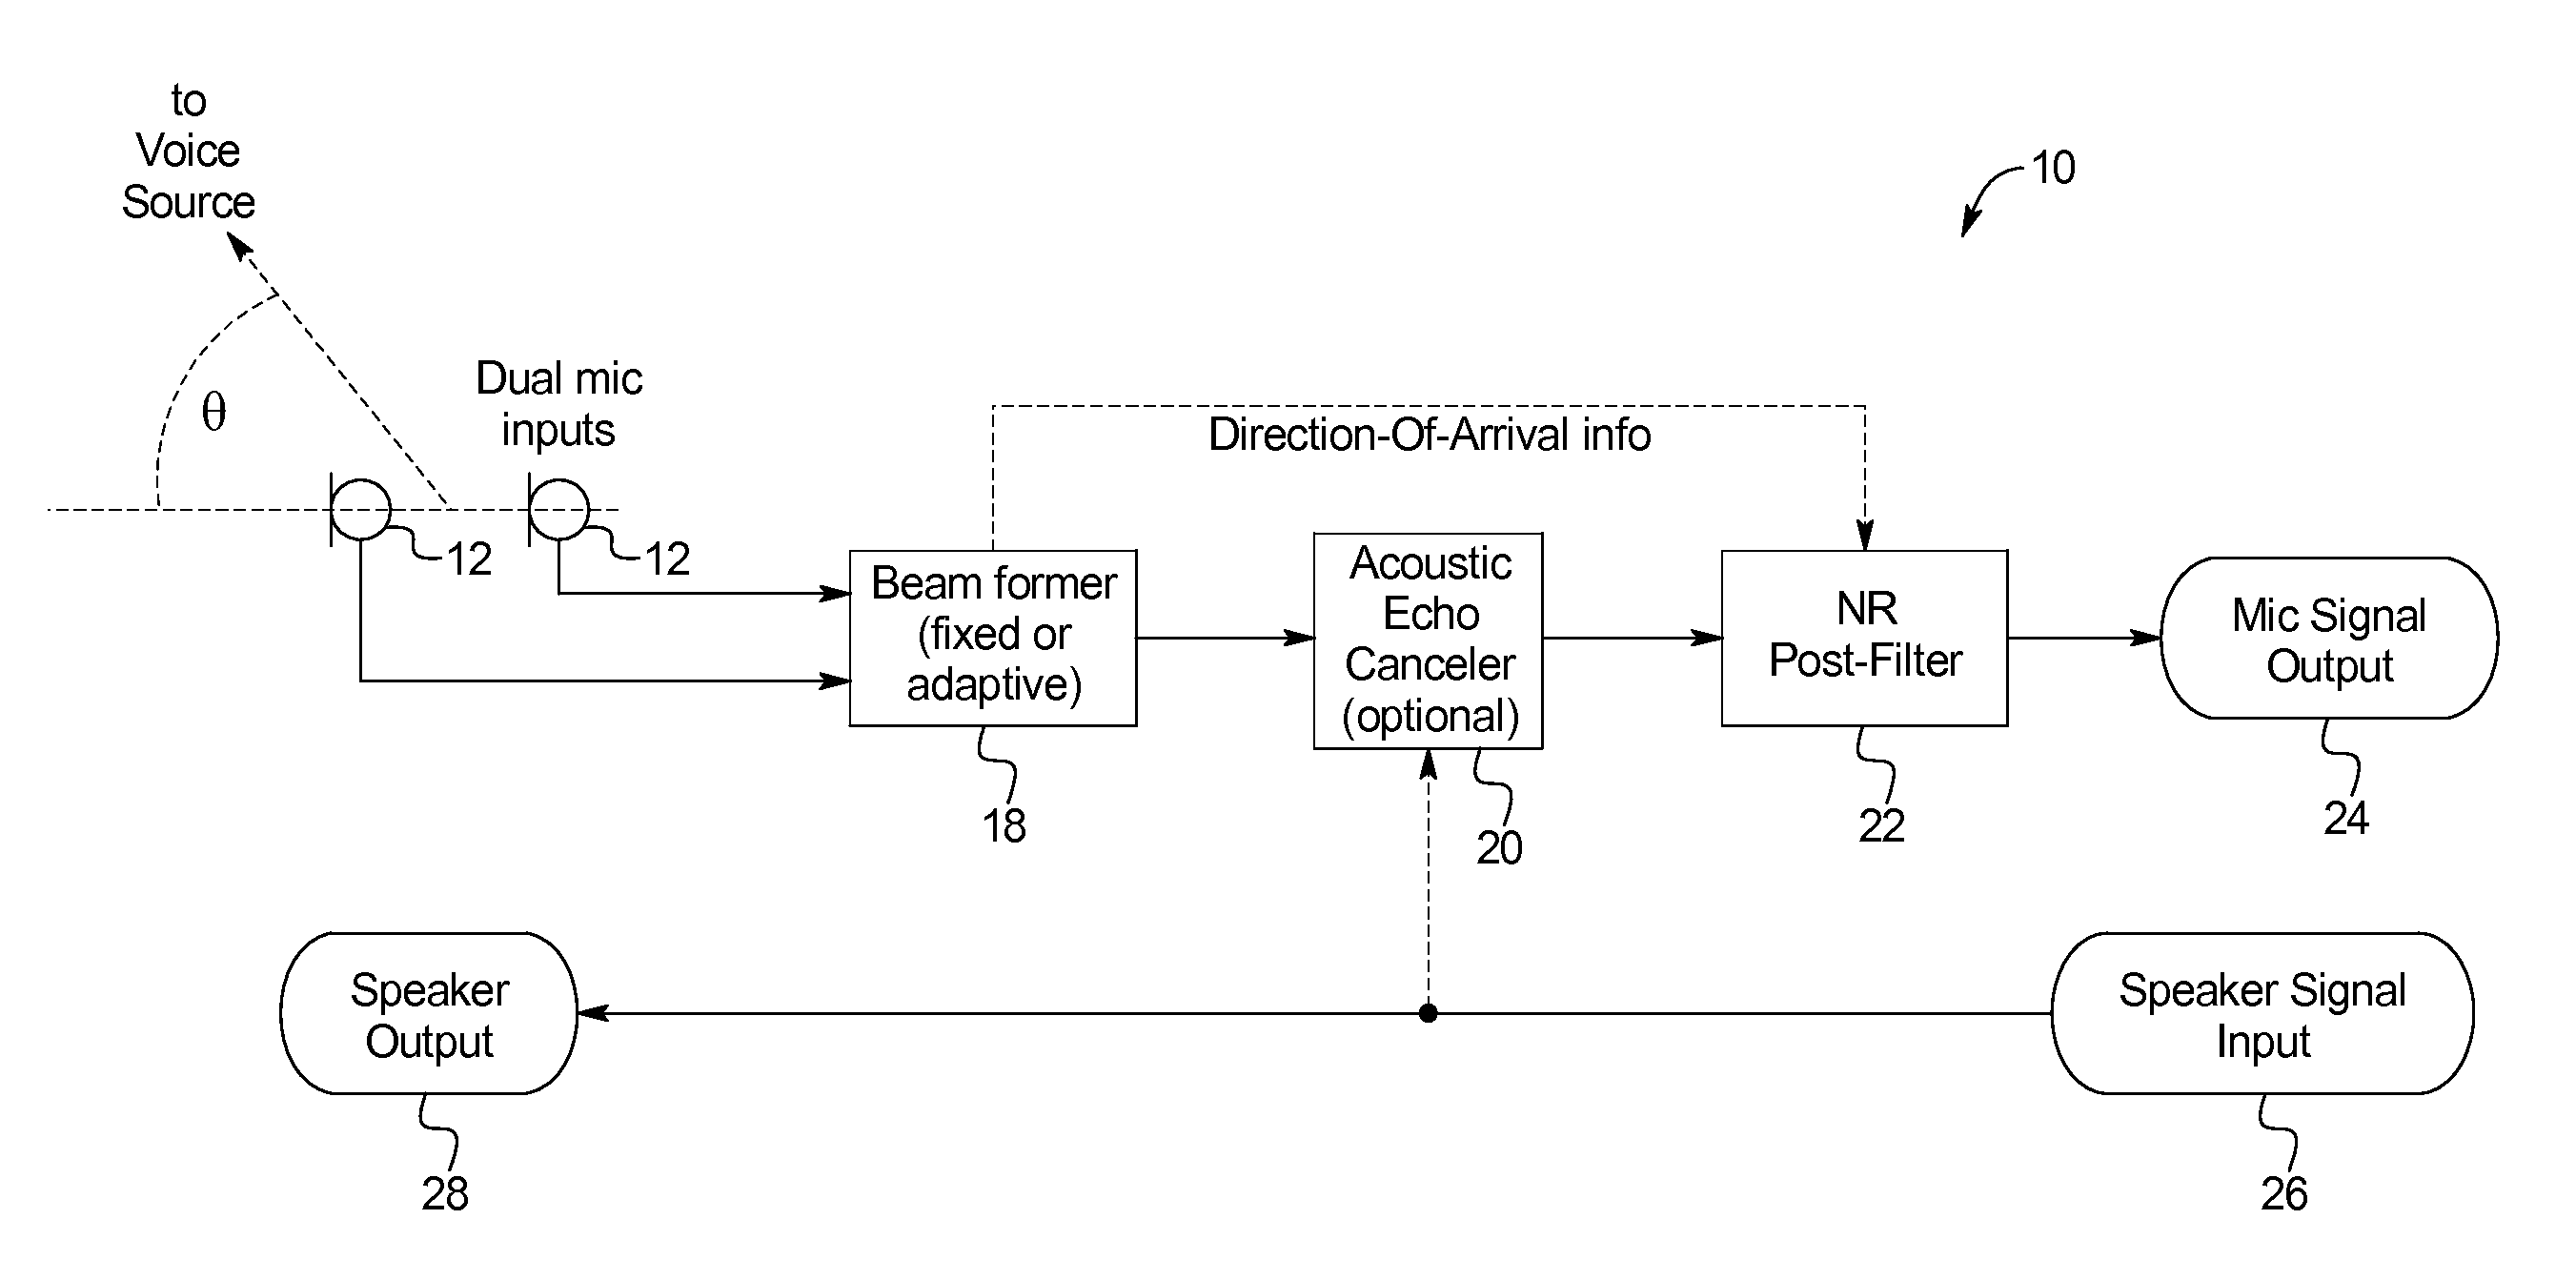 Noise reduction using direction-of-arrival information